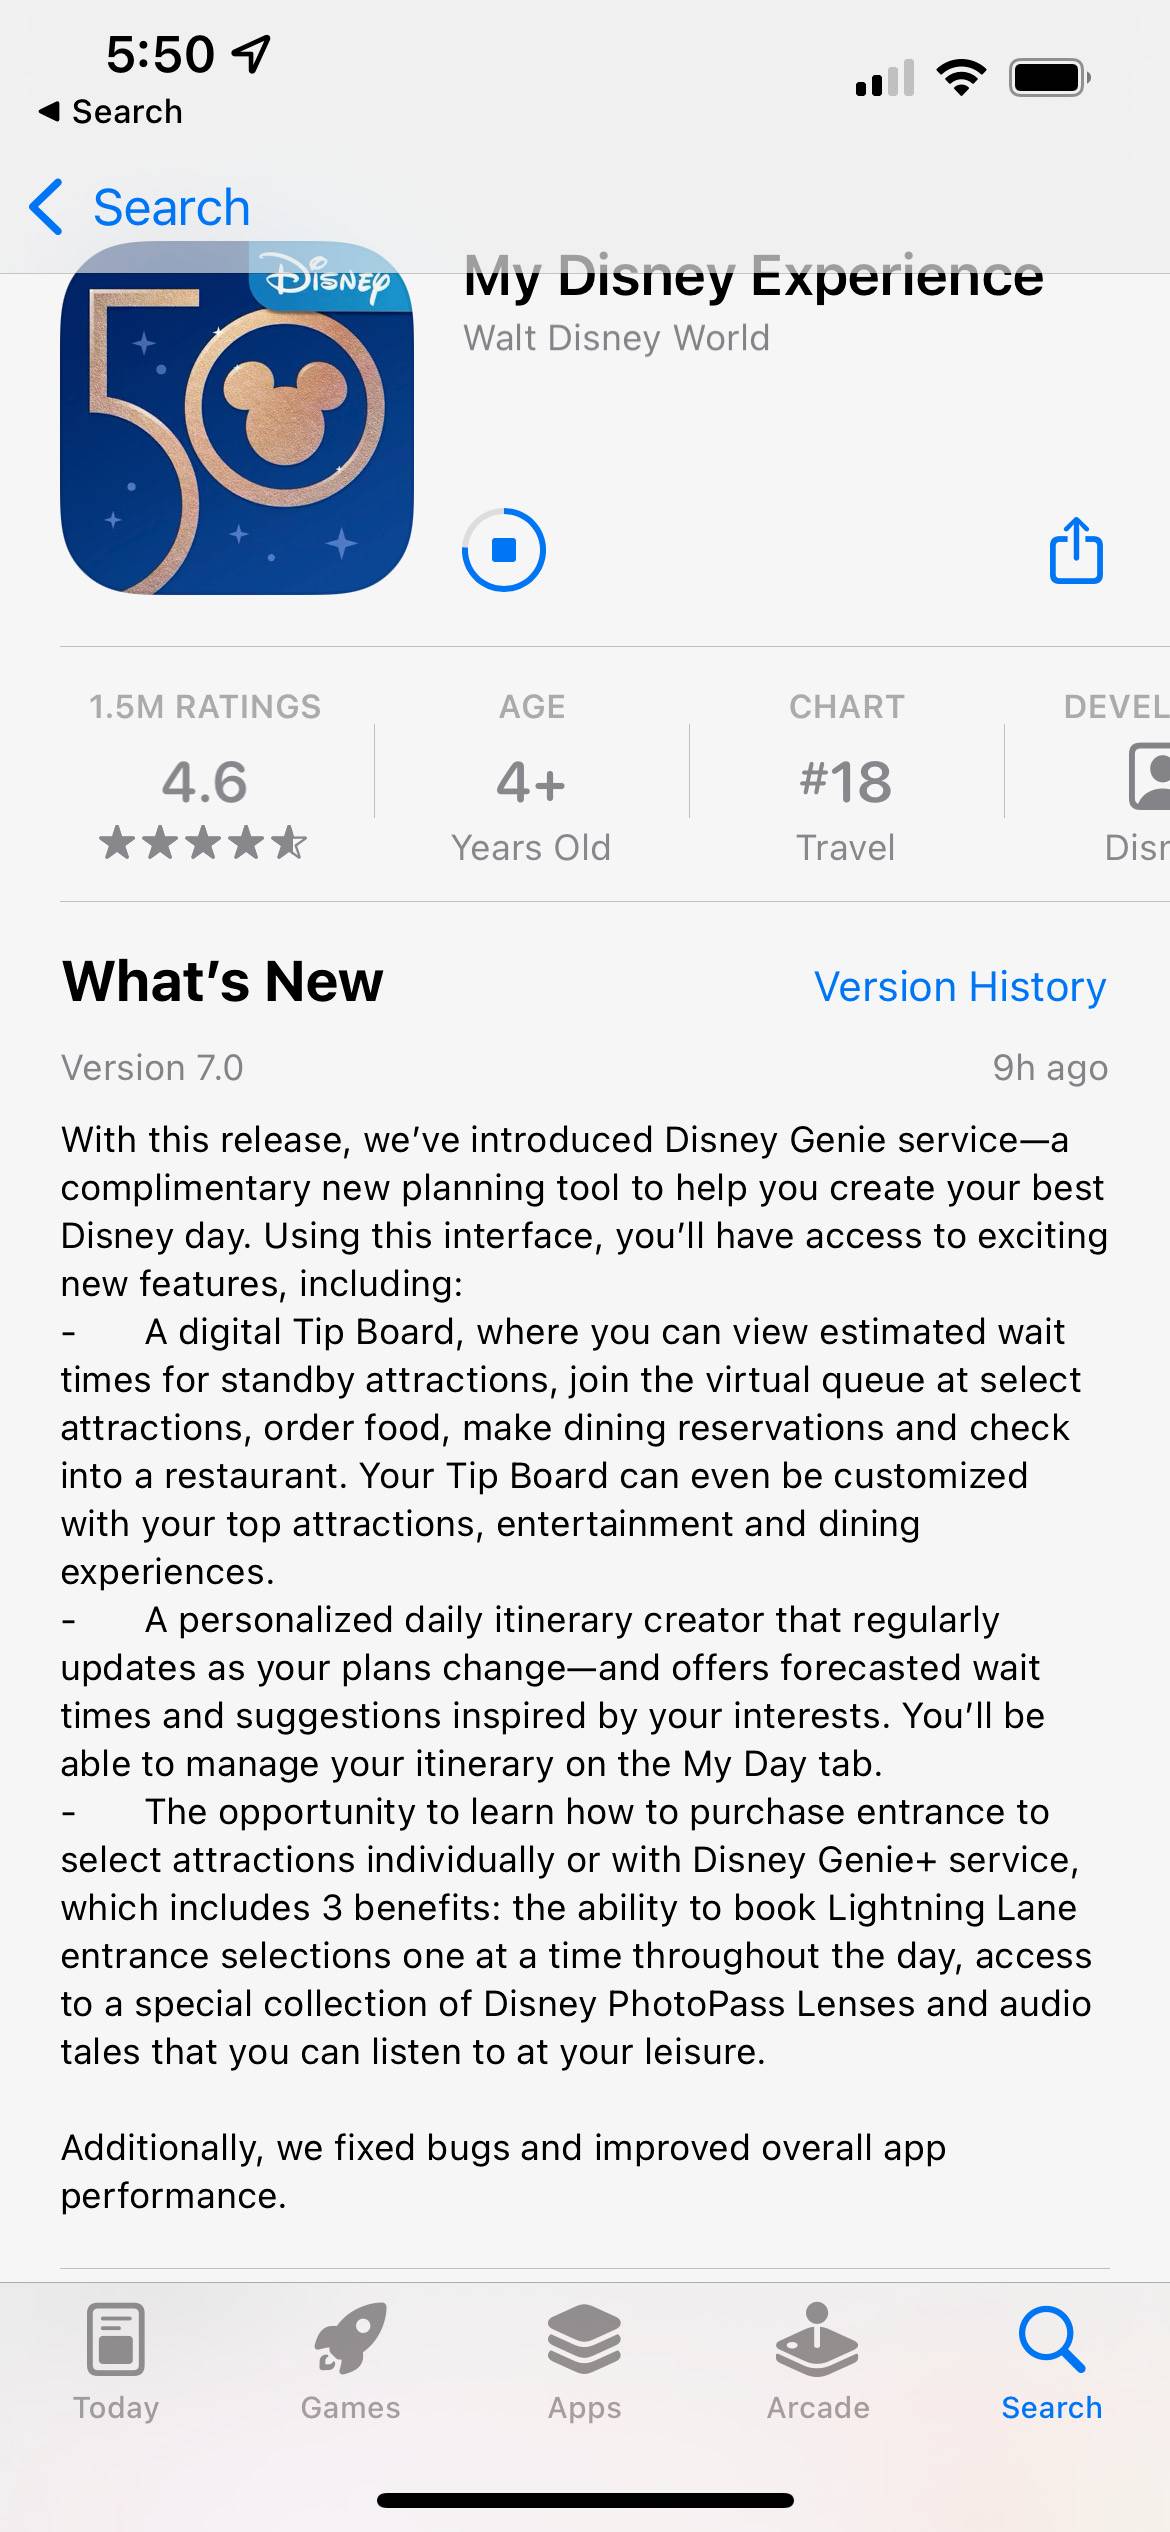 App Store update details for My Disney Experience to enable Genie